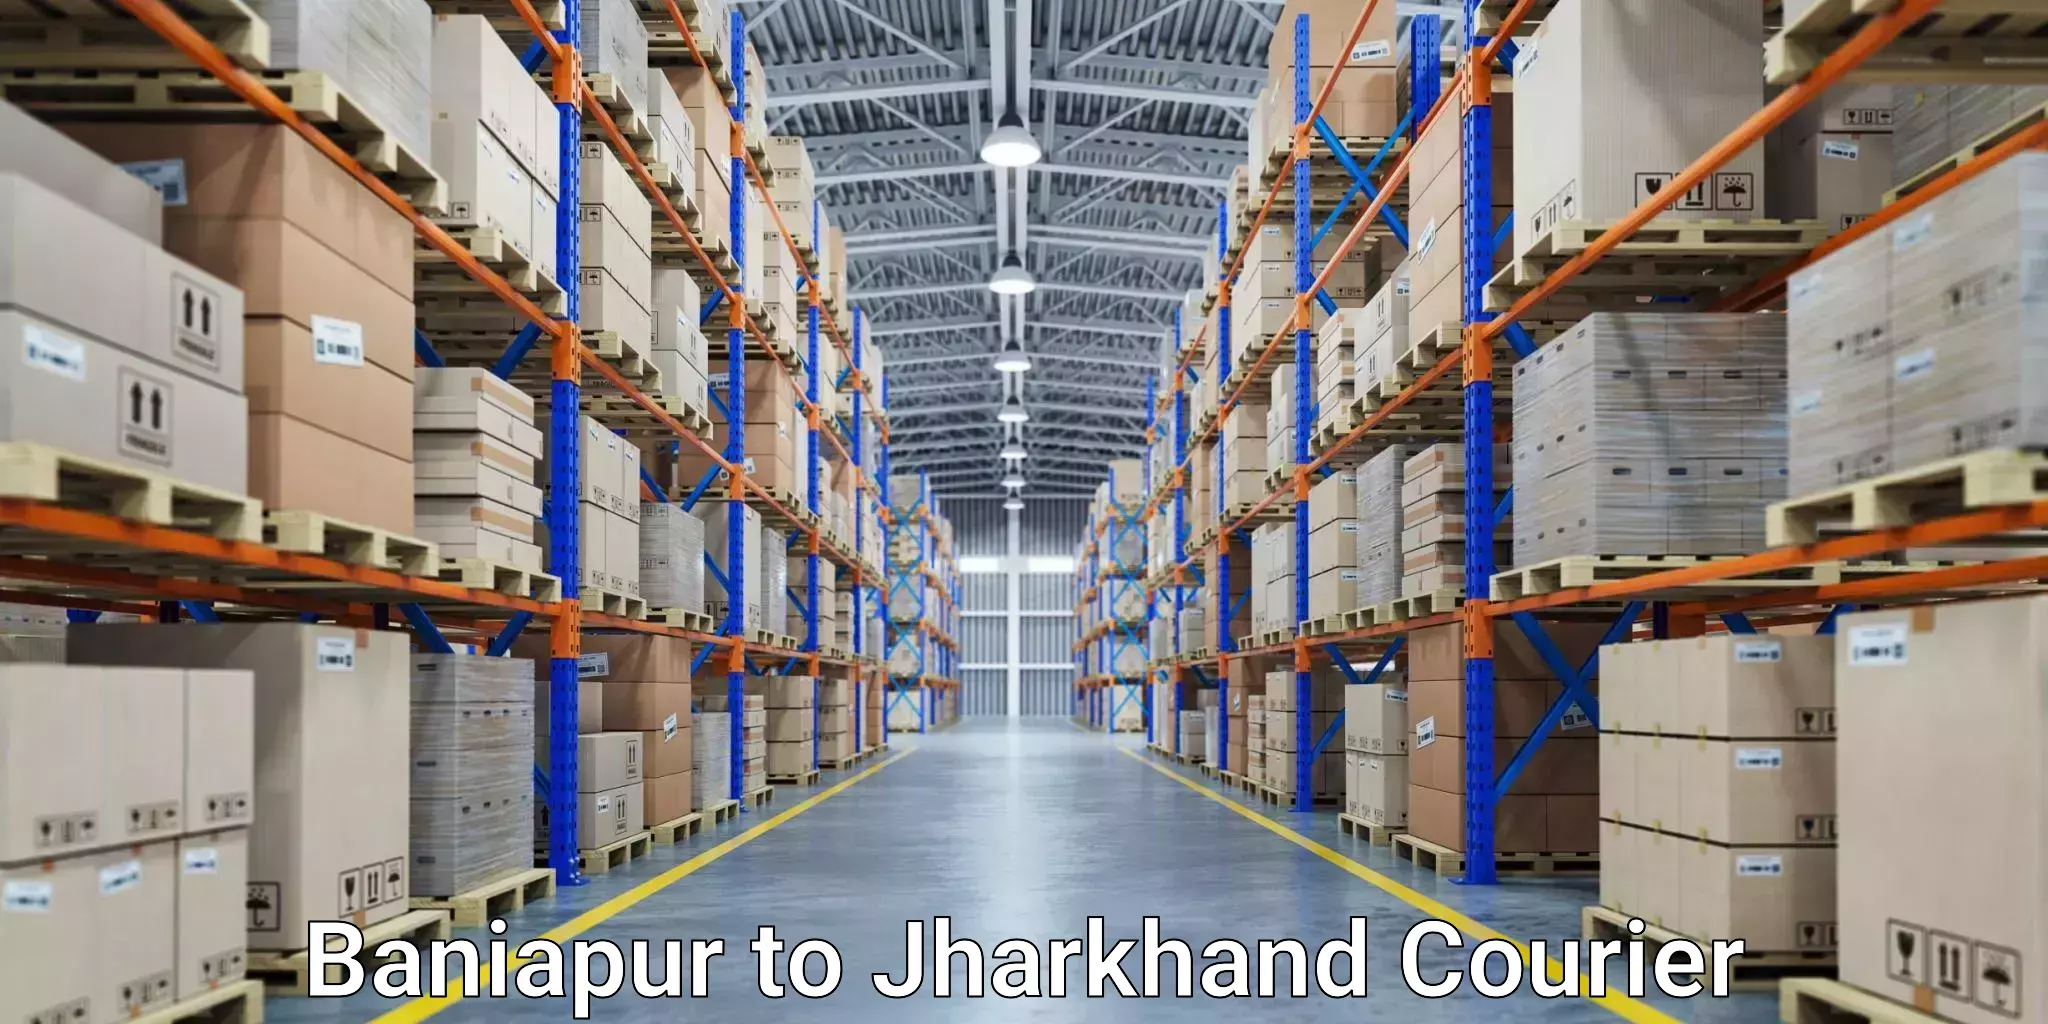 Package delivery network Baniapur to Jharkhand